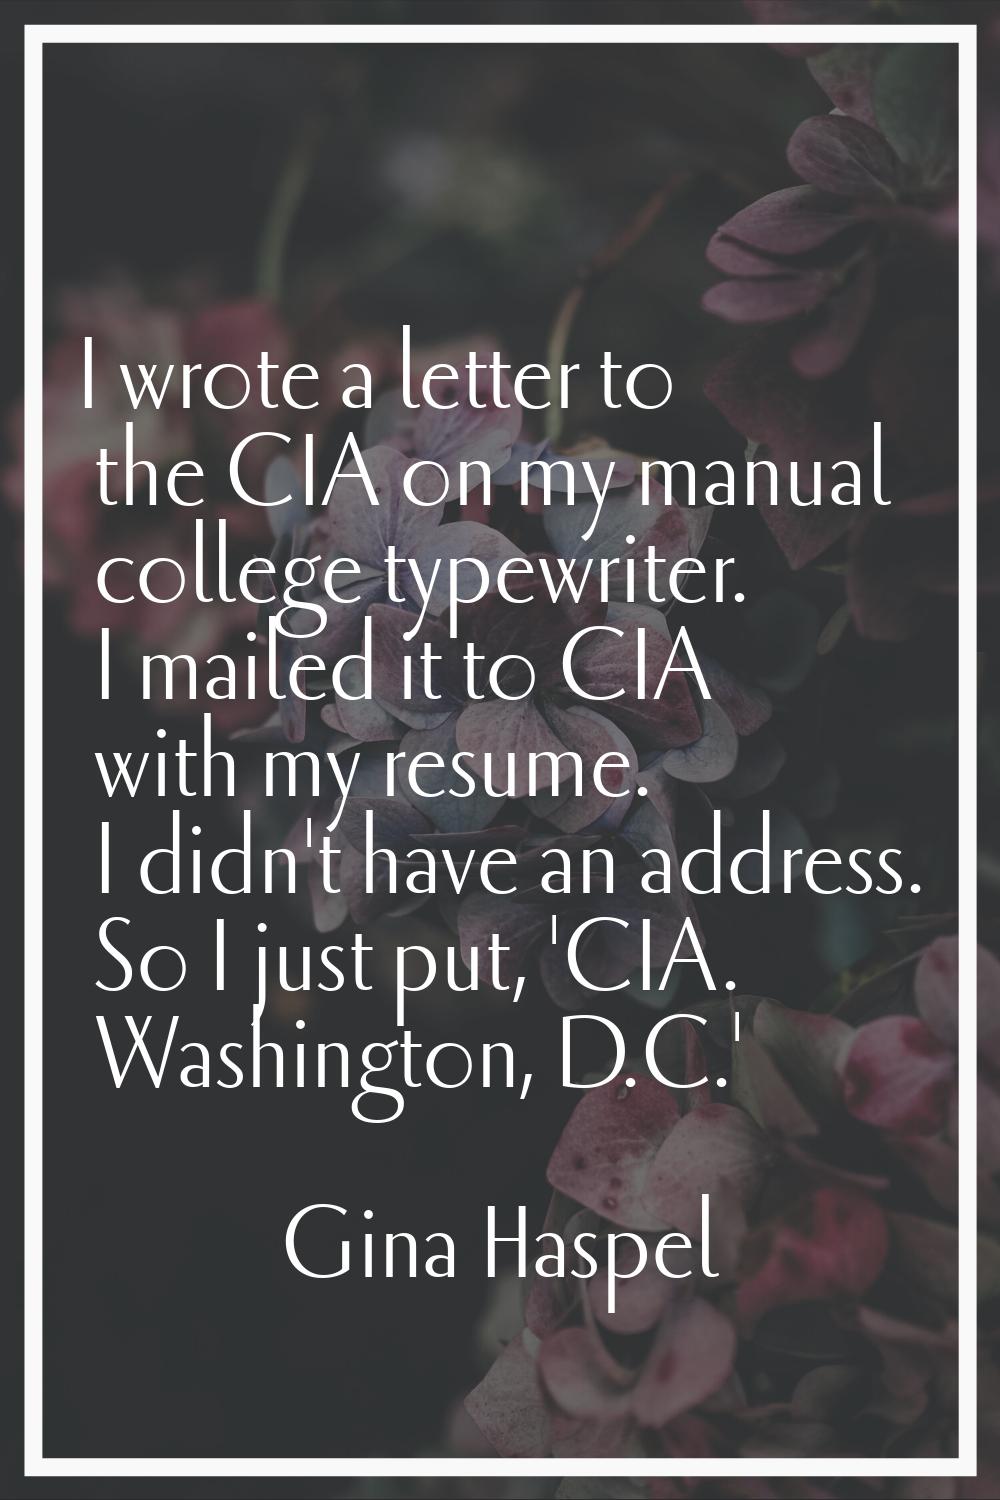 I wrote a letter to the CIA on my manual college typewriter. I mailed it to CIA with my resume. I d